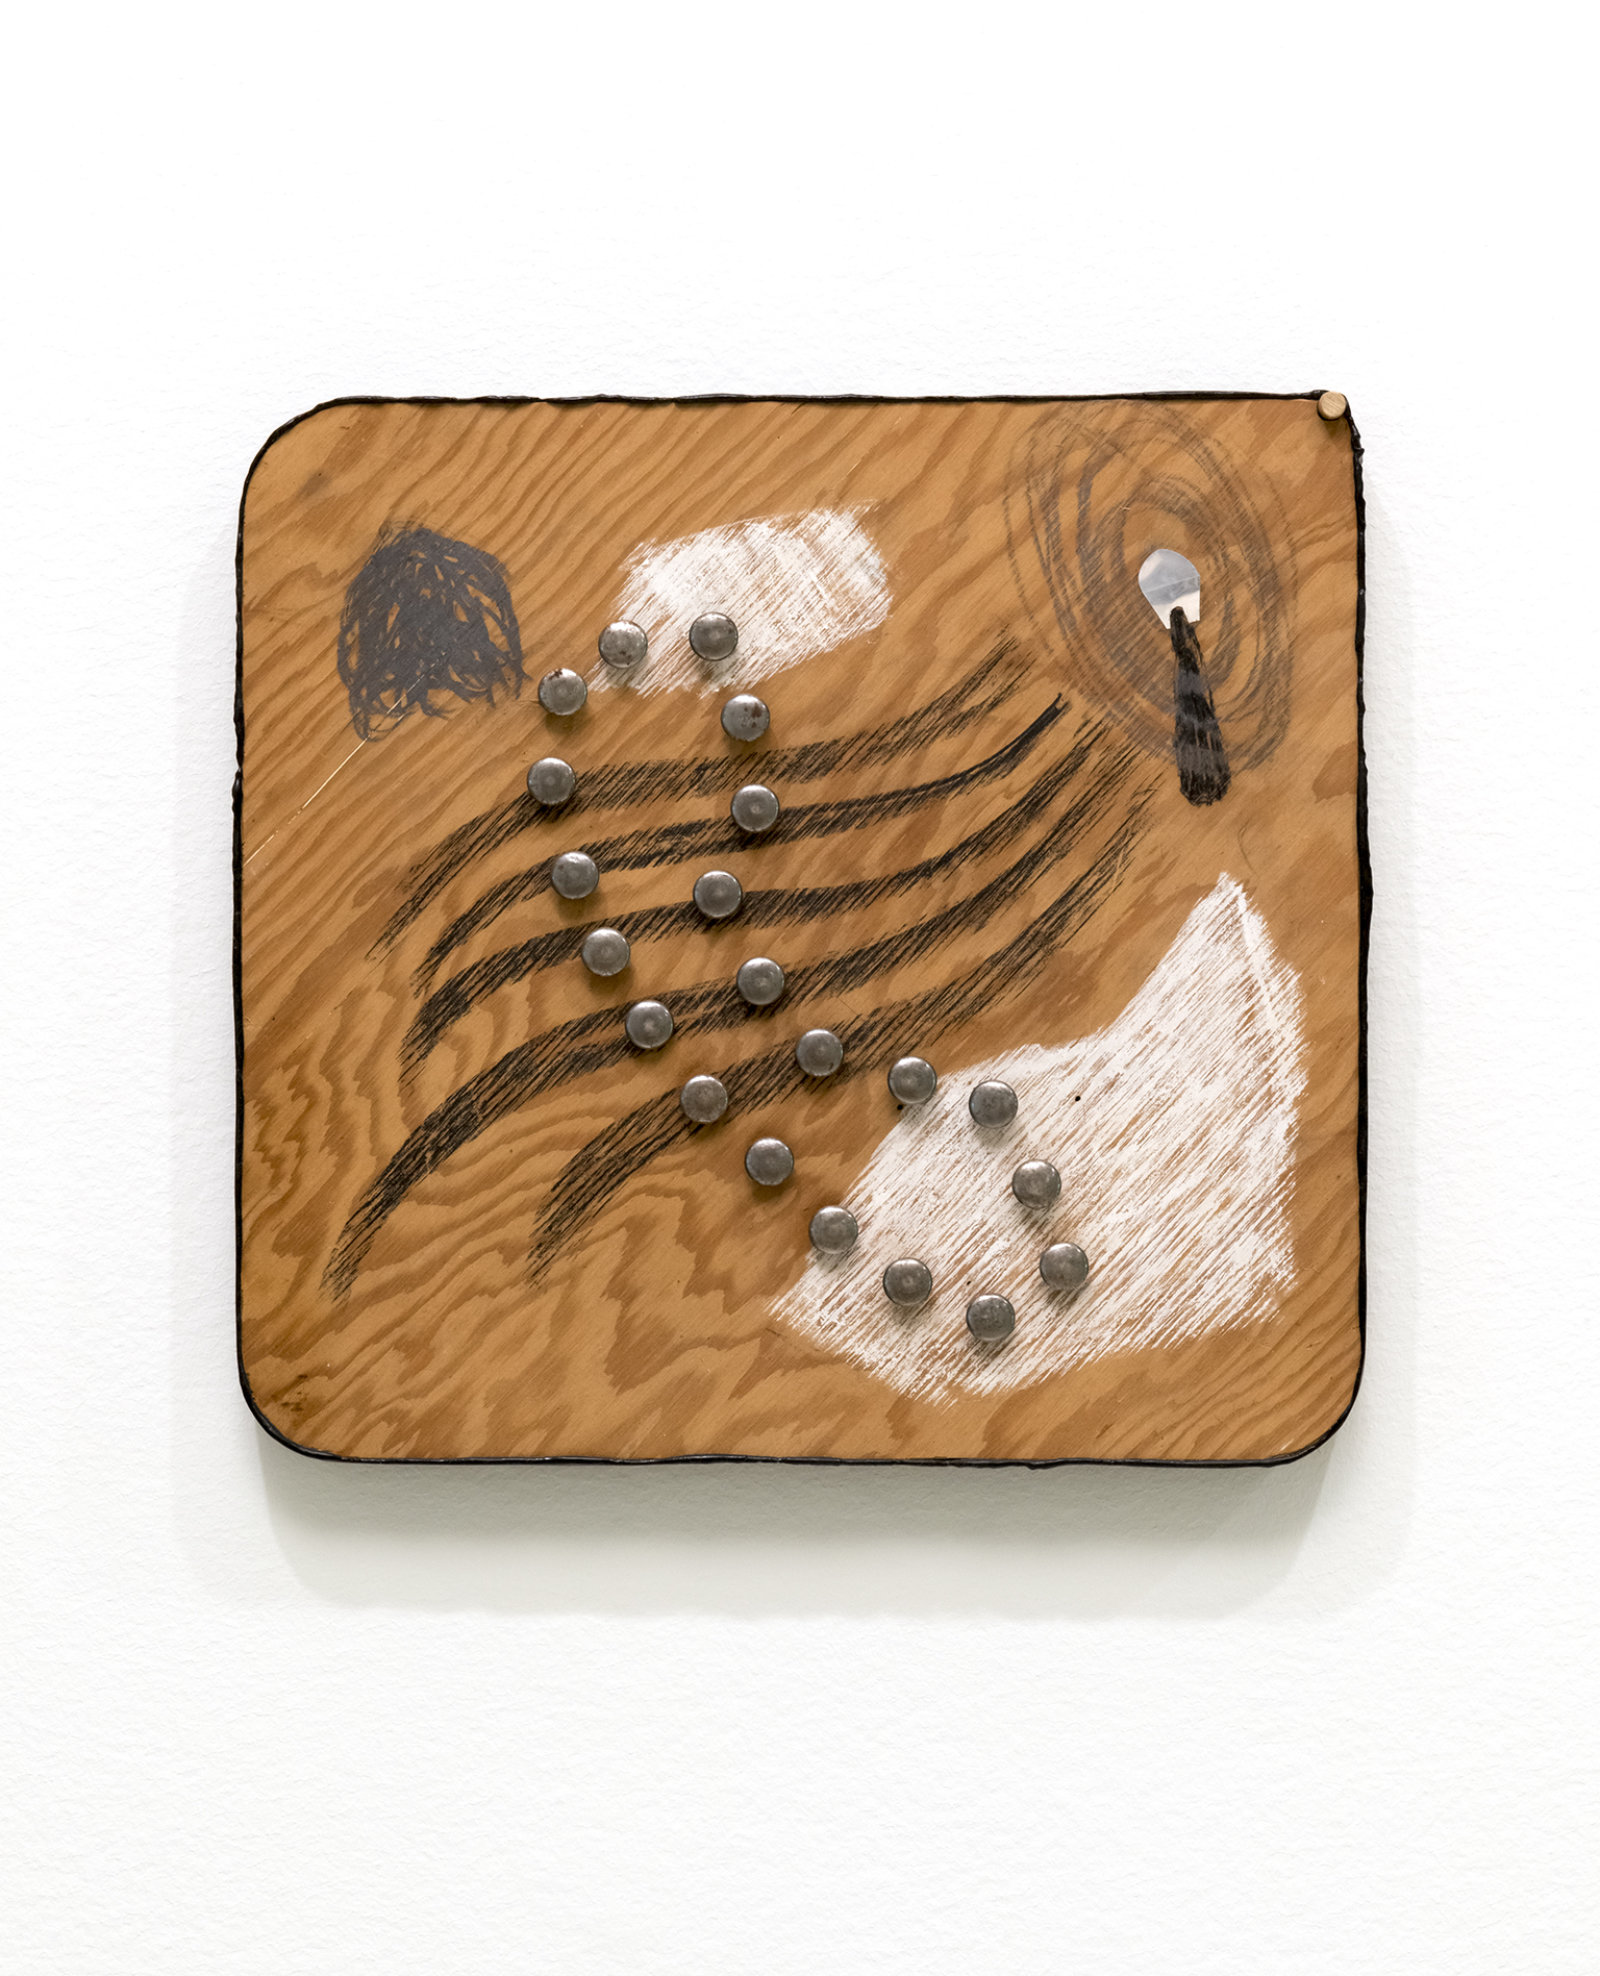 Jerry Pethick, To Your Ghost, 1993, wood, metal, paint, silicone, crayon, 16 x 17 x 1 in. (40 x 42 x 4 cm)